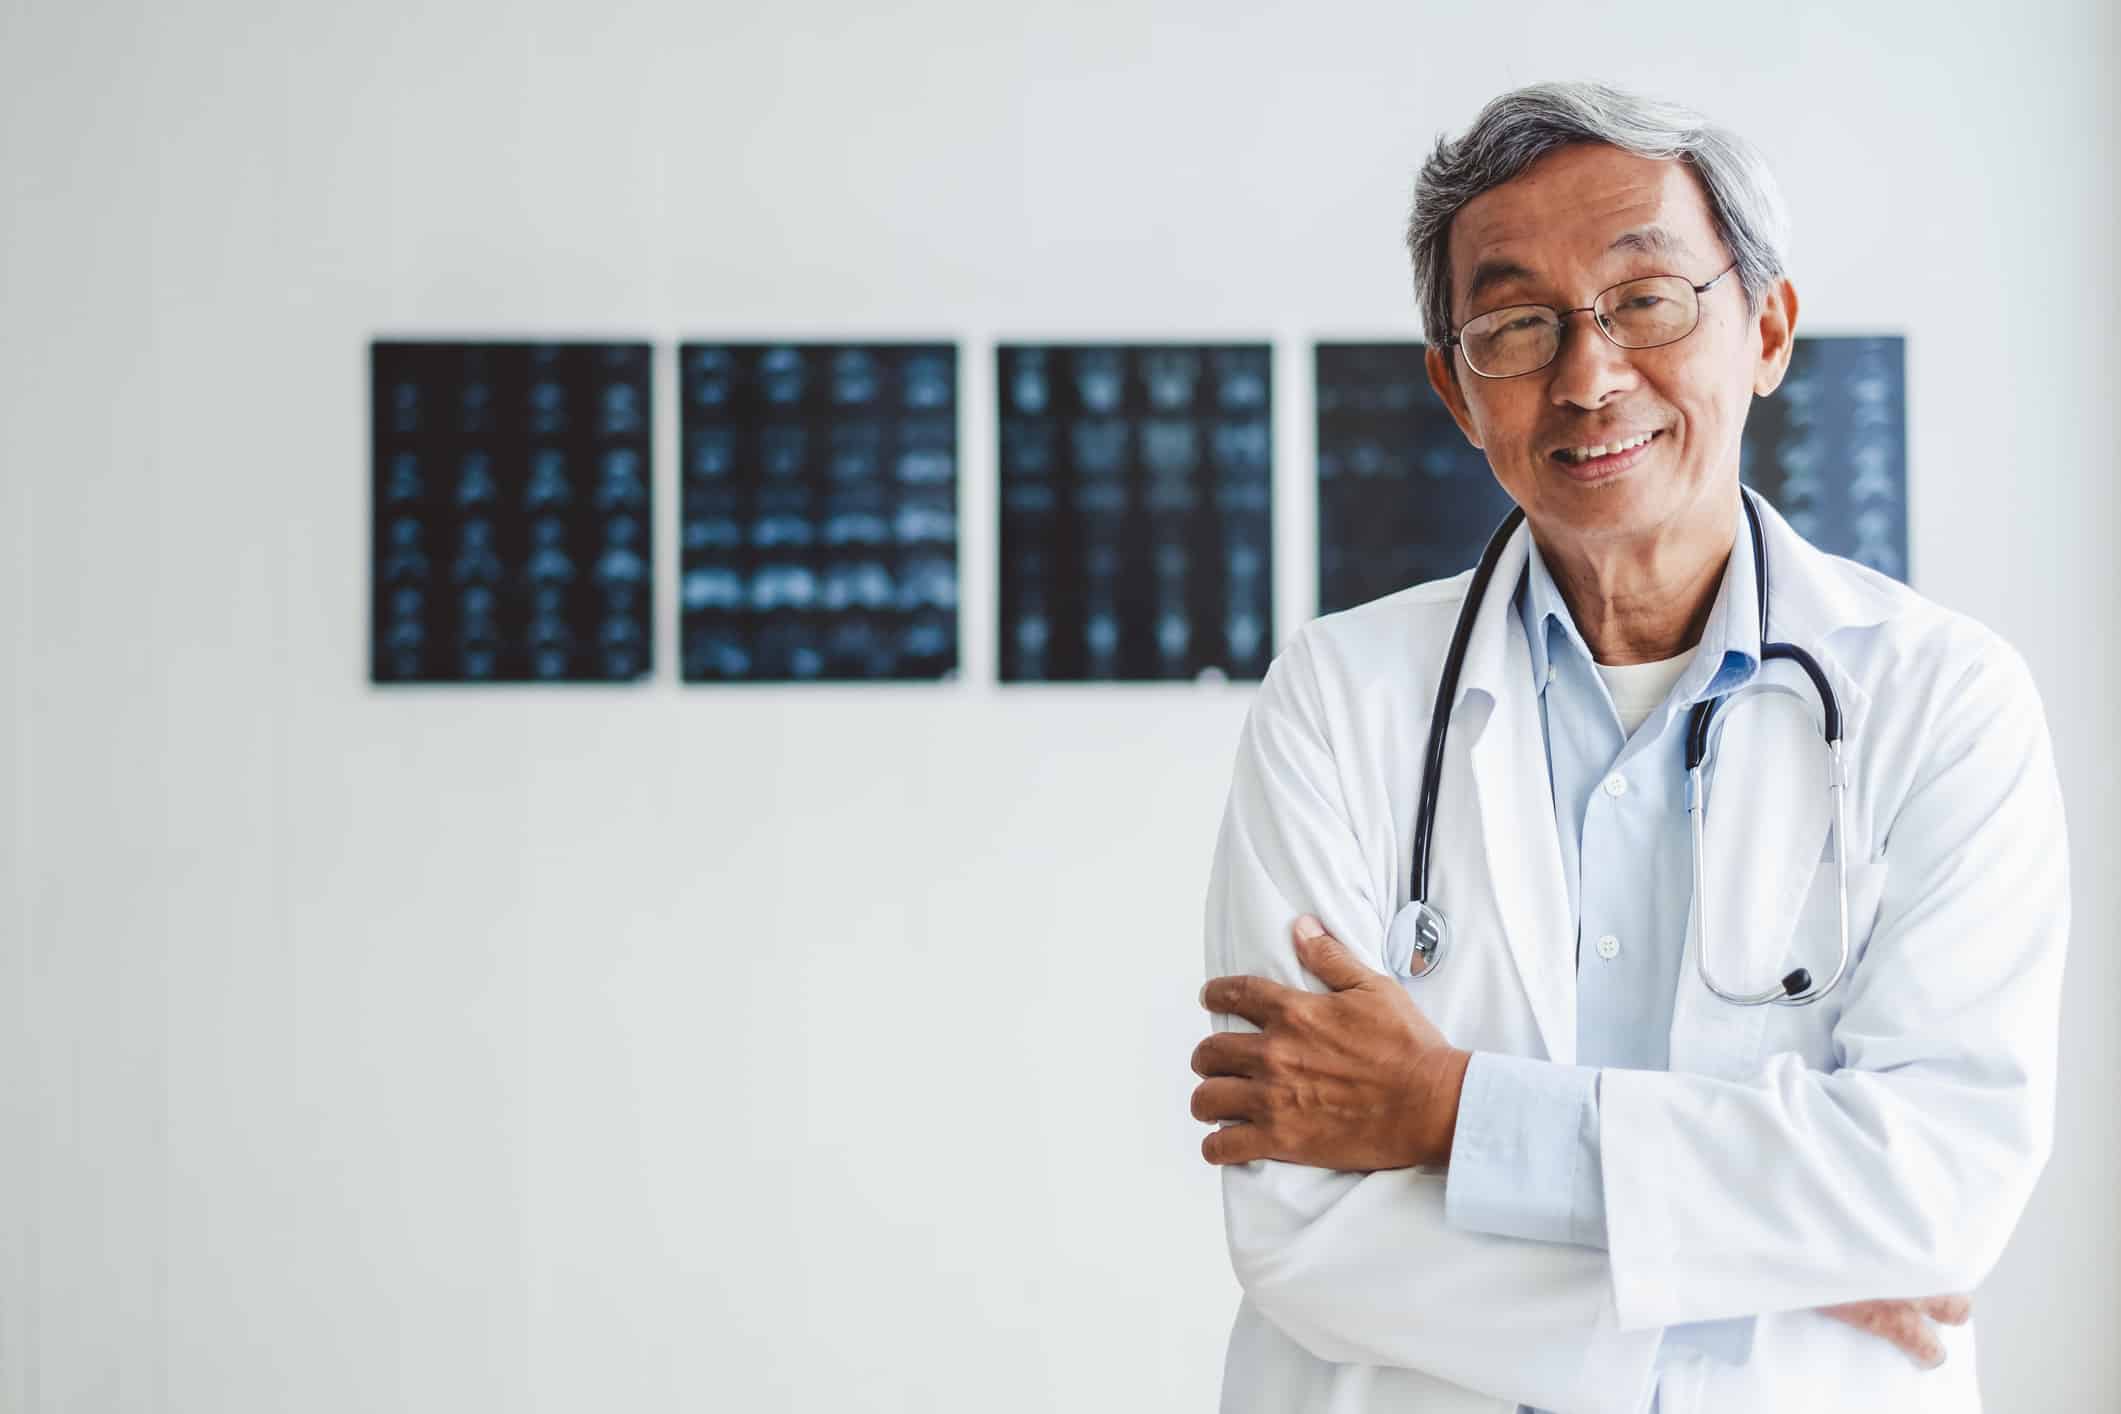 3 Benefits of Staying Active in the Medical Field Once You've Retired